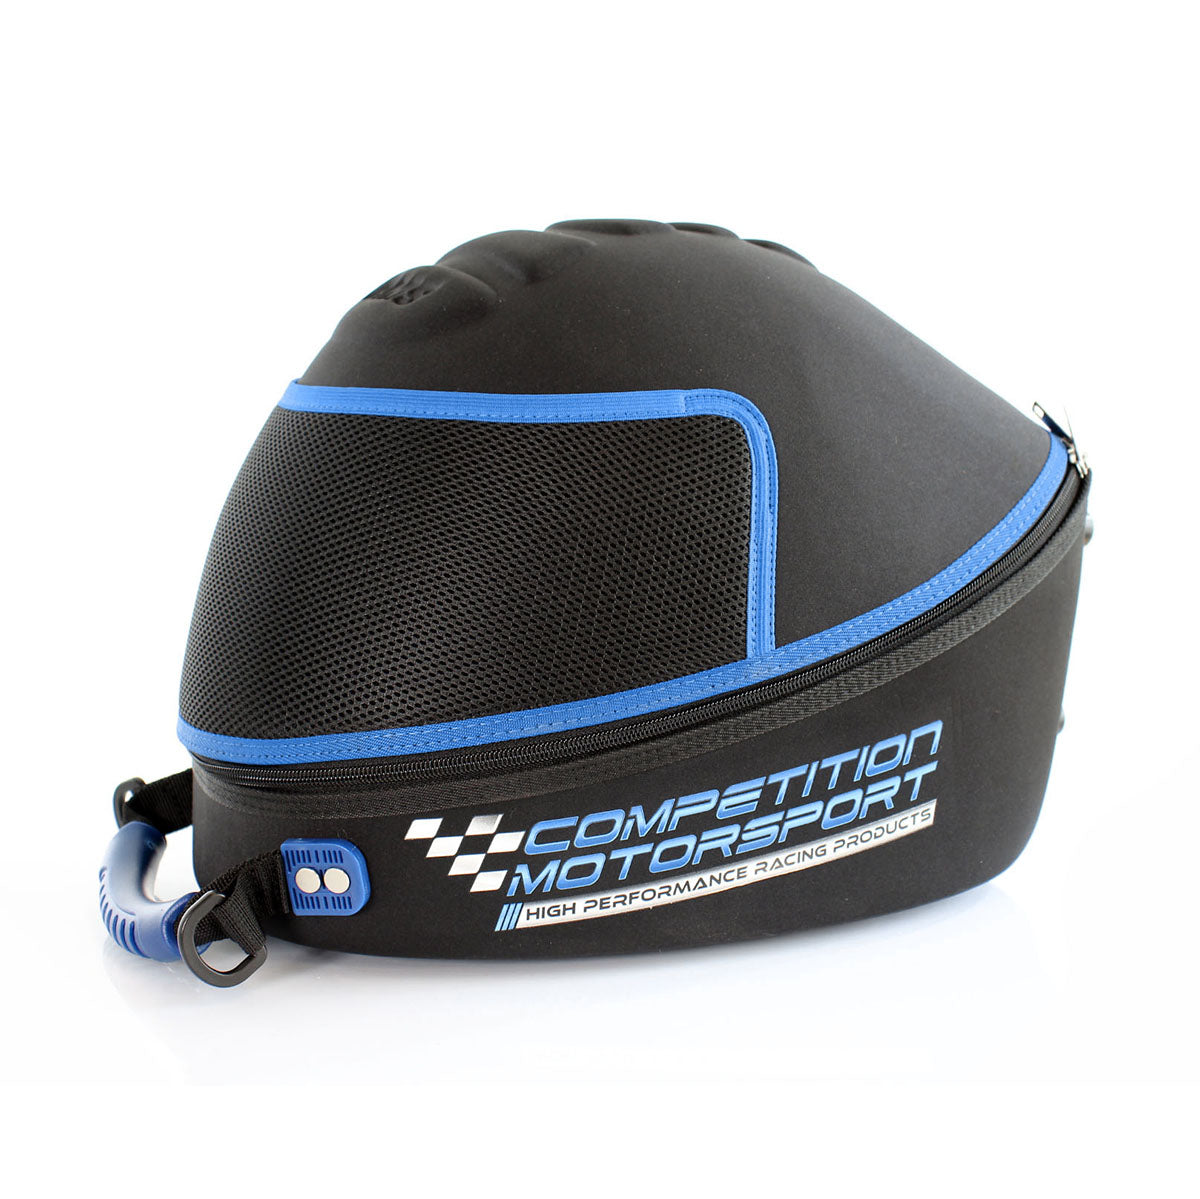 "High-Quality Helmet Bag by CMS Performance - Protect Your Gear"